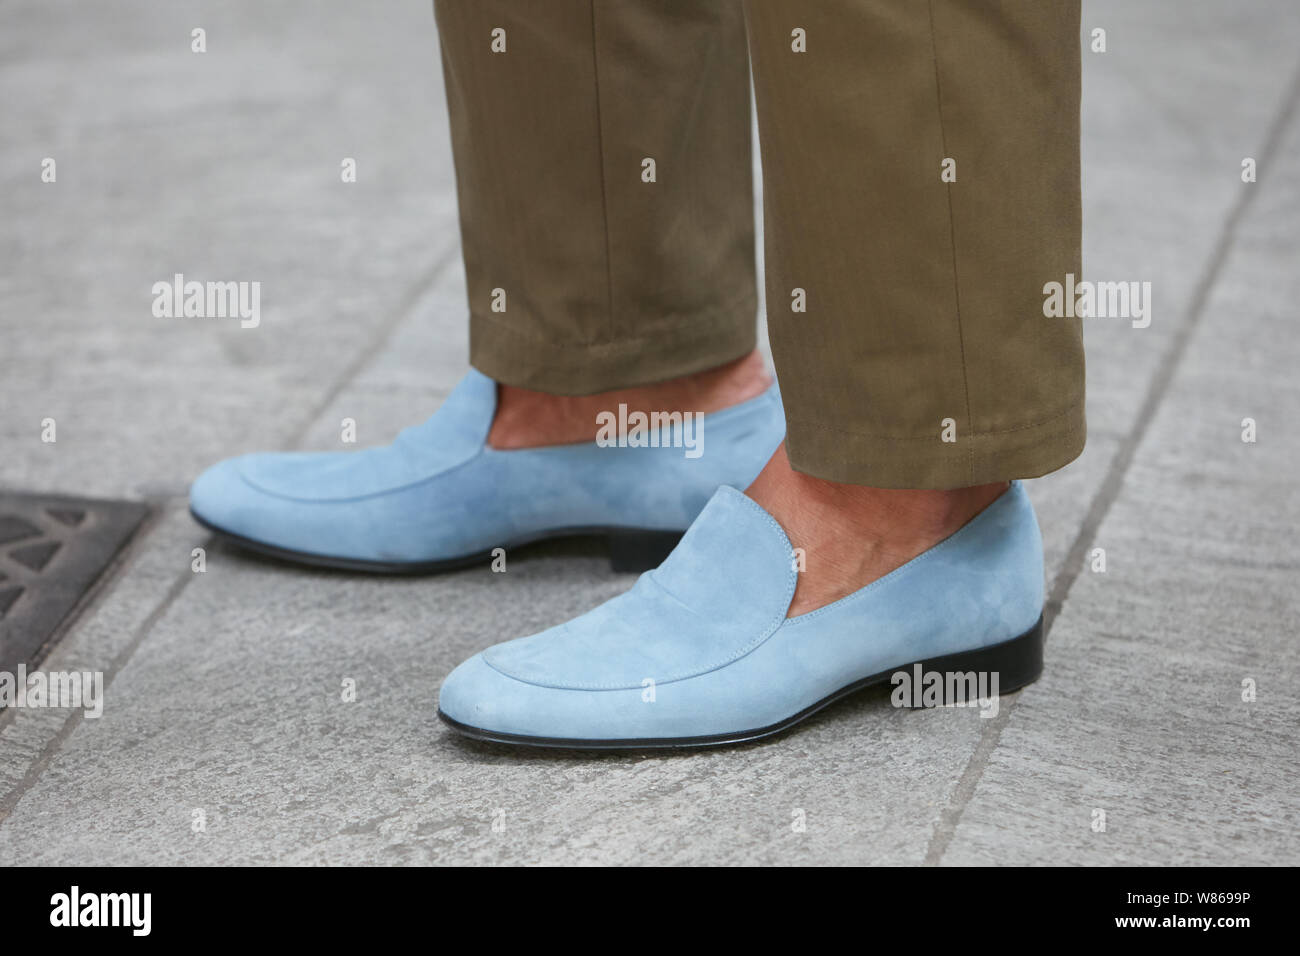 MILAN, ITALY - JUNE 15, 2019: Man with pale blue suede shoes and brown trousers before Emporio Armani fashion show, Milan Fashion Week street style Stock Photo